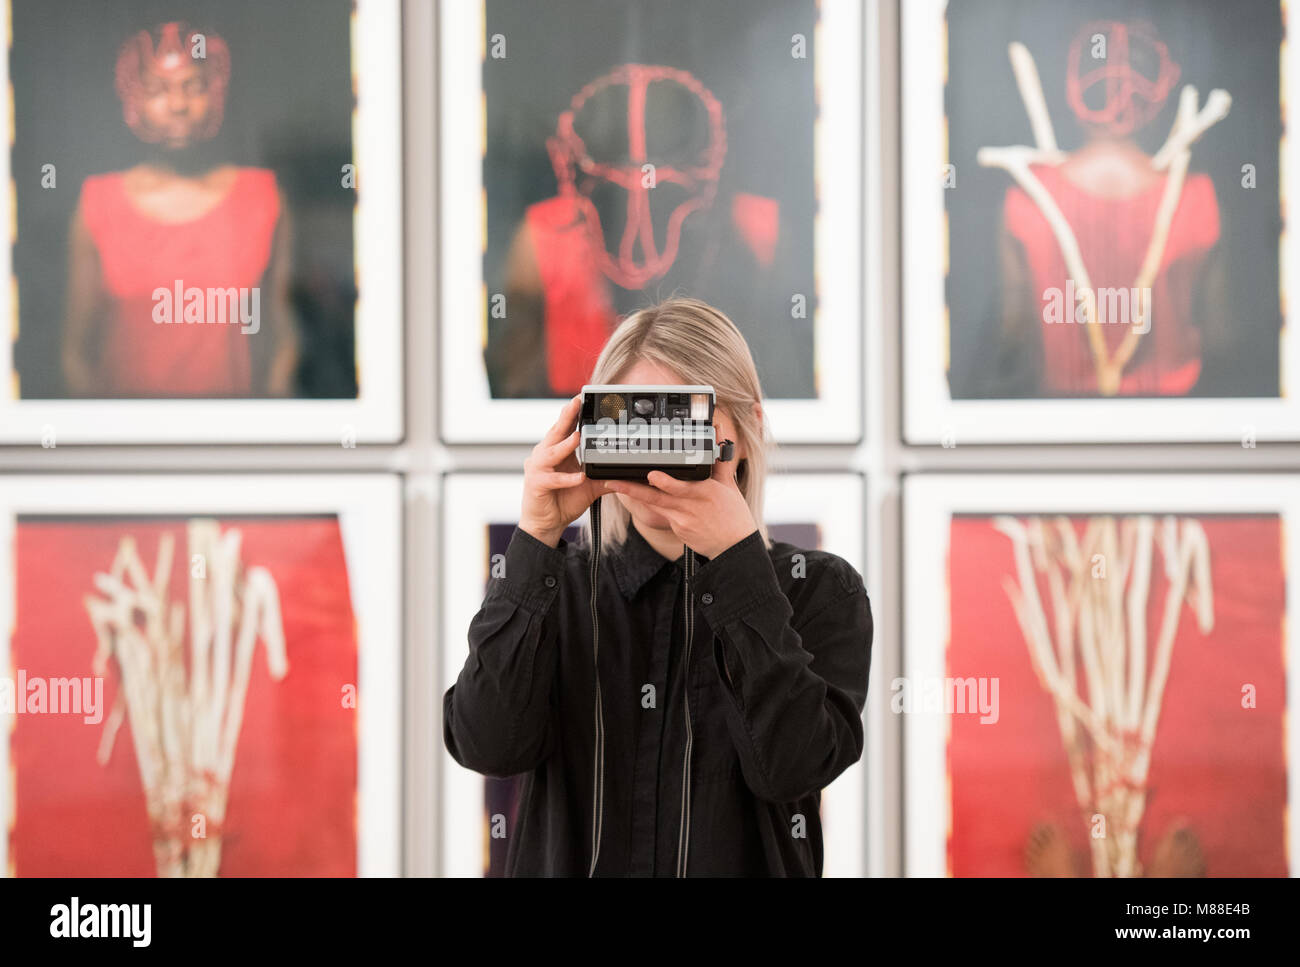 15.03.2018, Hamburg: A woman takes photos in the exhibition "The Polaroid  Project" at the Museum für Kunst und Gewerbe in front of the work "Abridor  de Caminos" (1997) by Maria Magdalena Campos-Pons